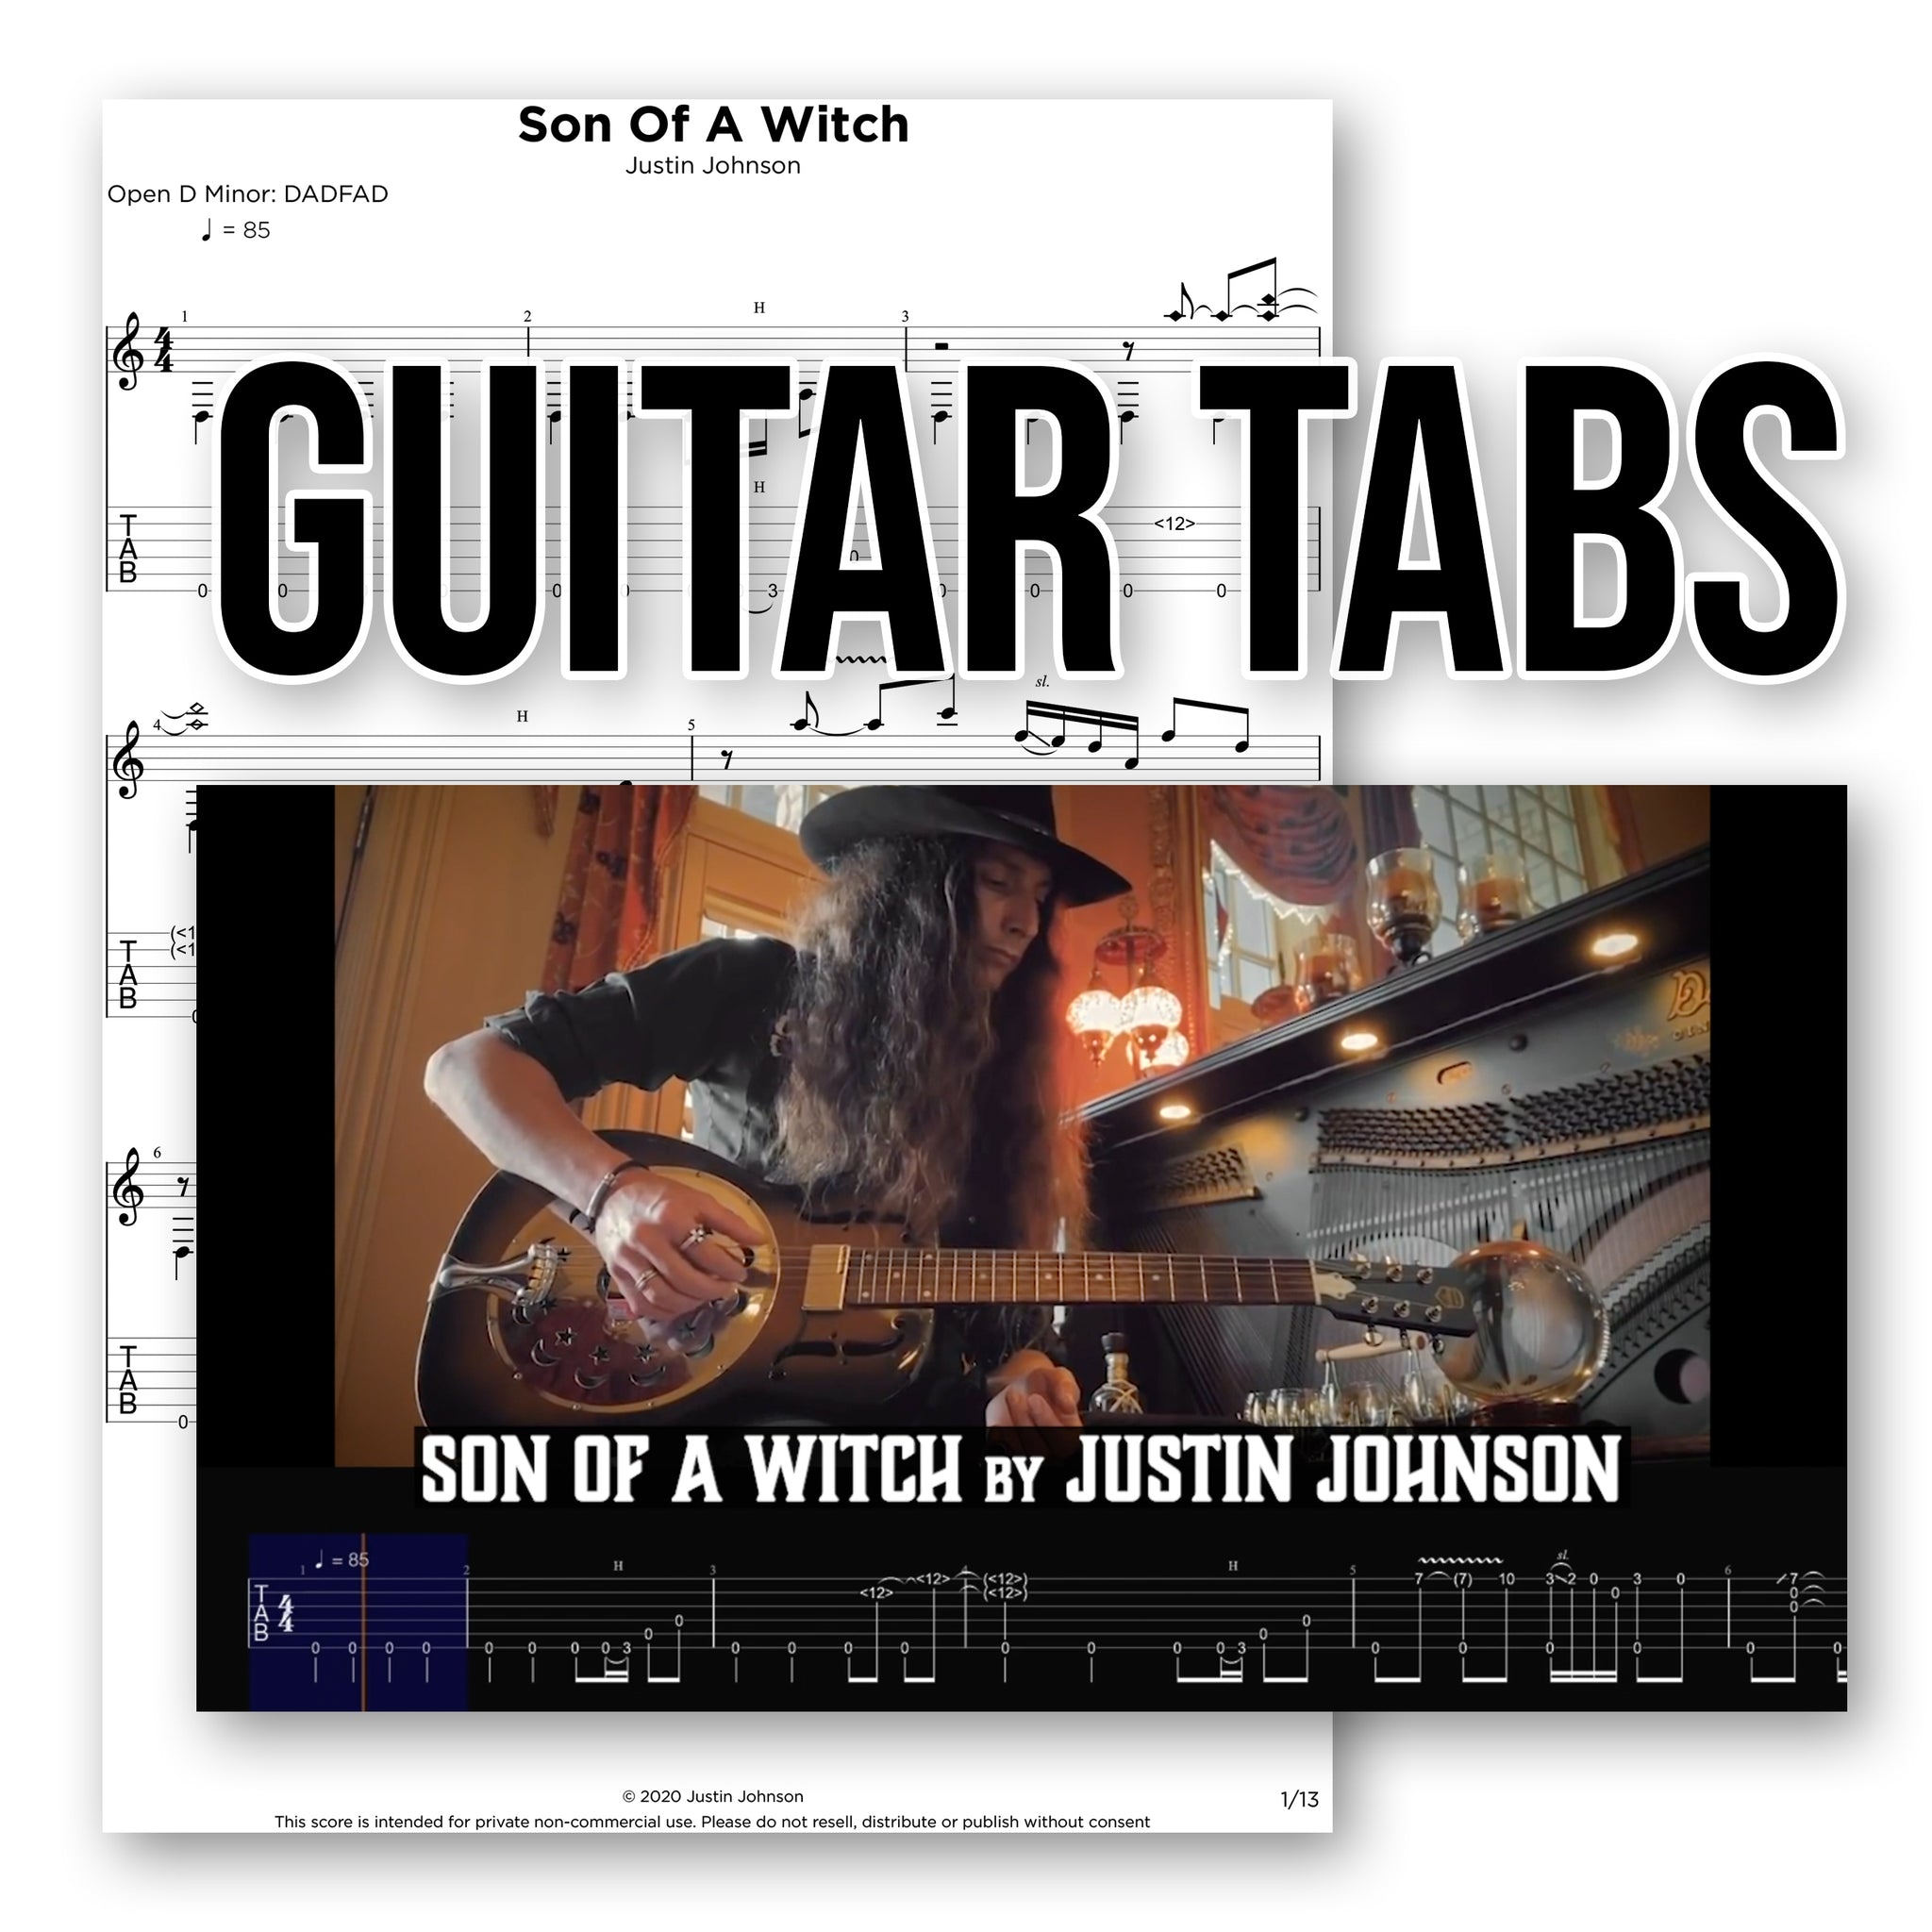 GUITAR TABS - "Son of a Witch"